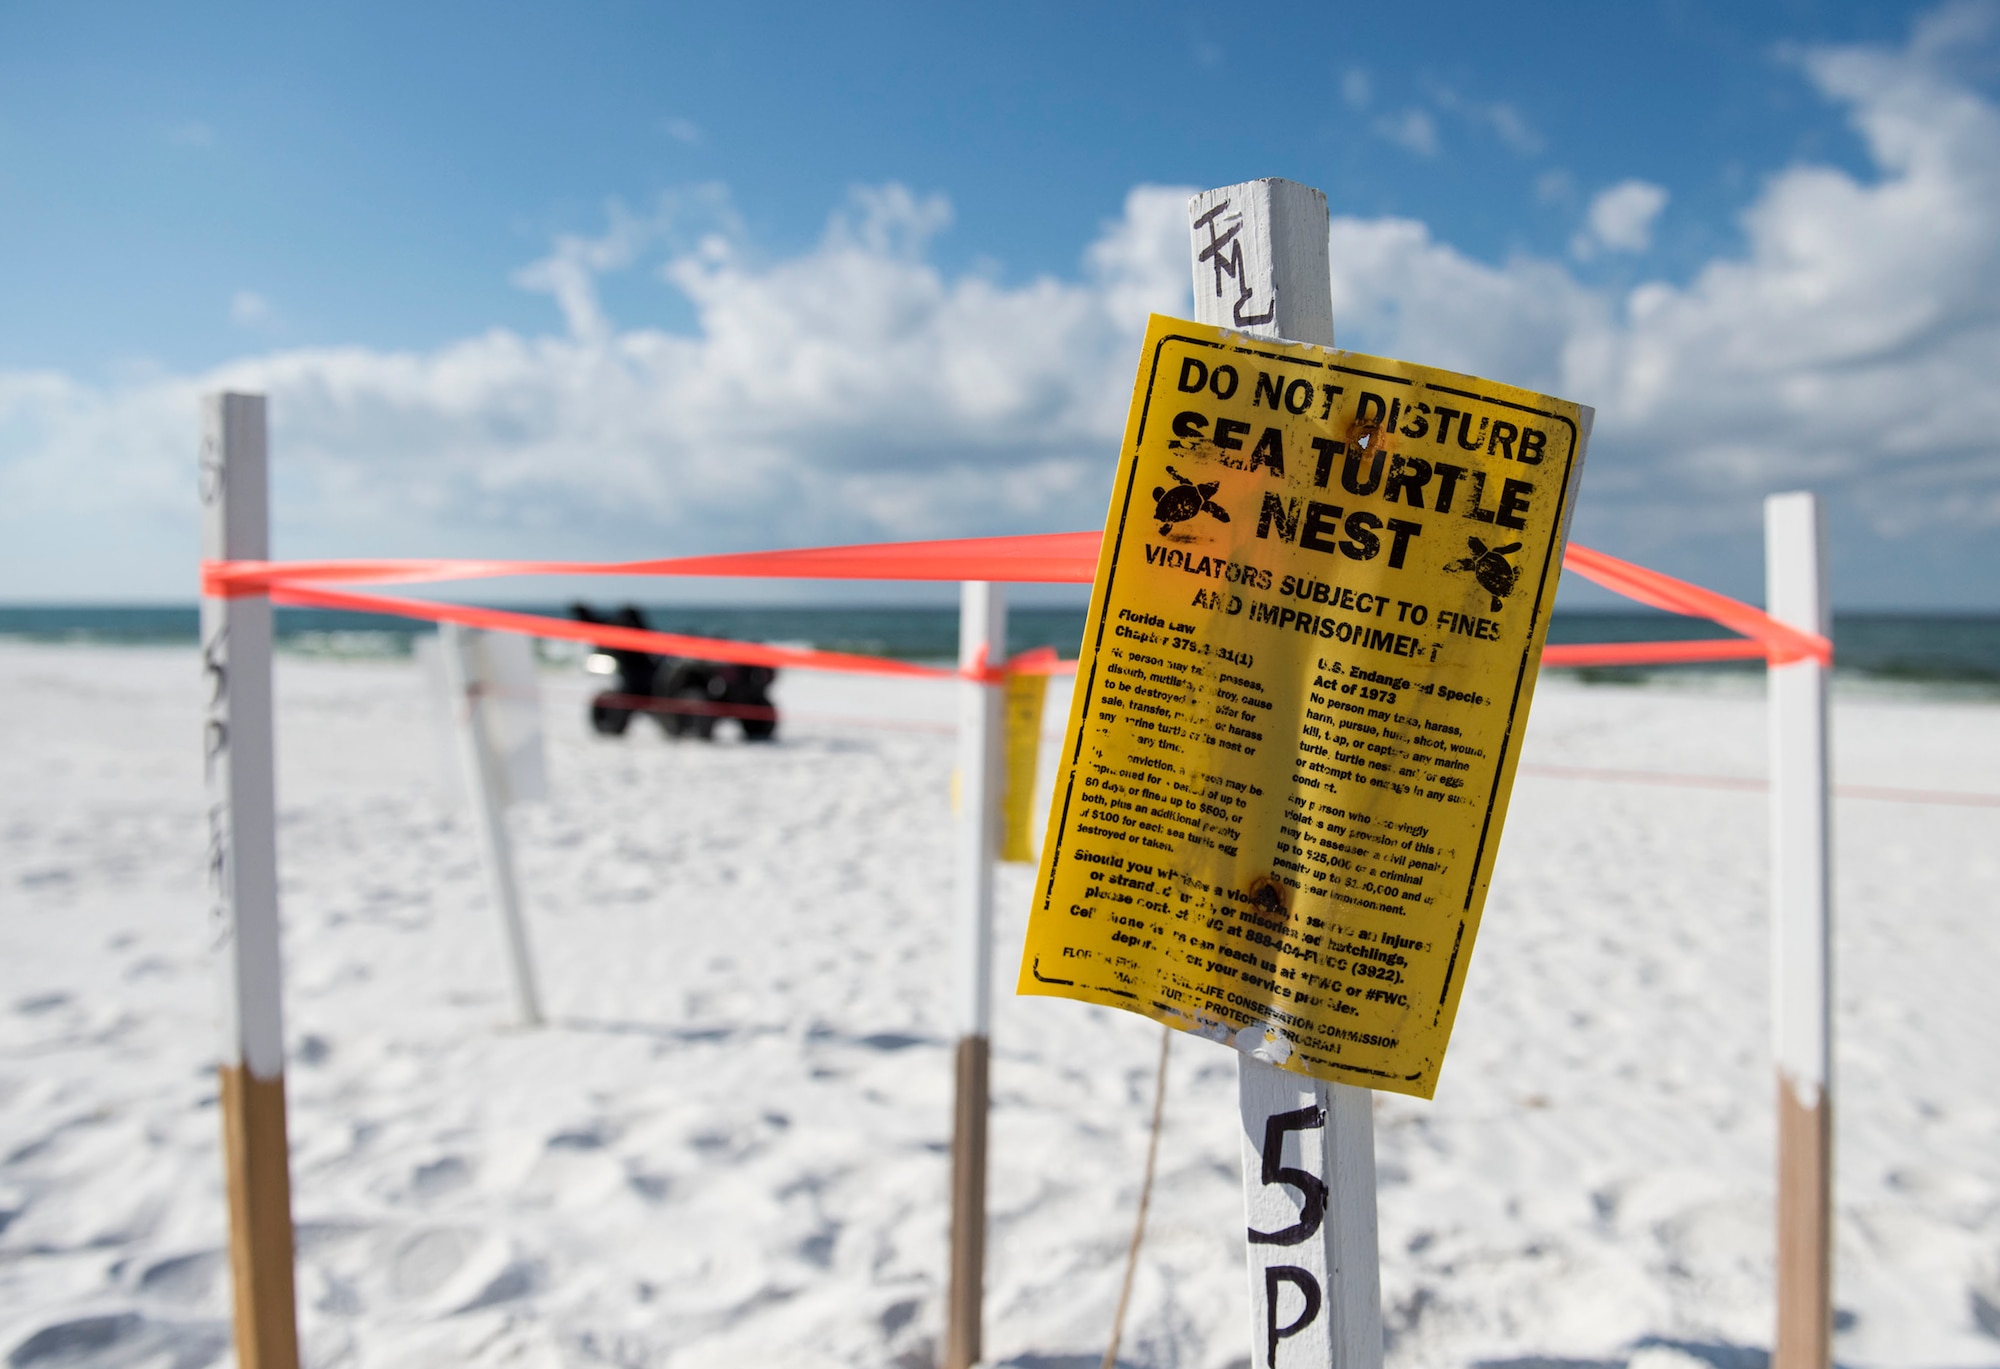 Nests from four threatened or endangered sea turtle species were discovered this year on the Eglin reservation.